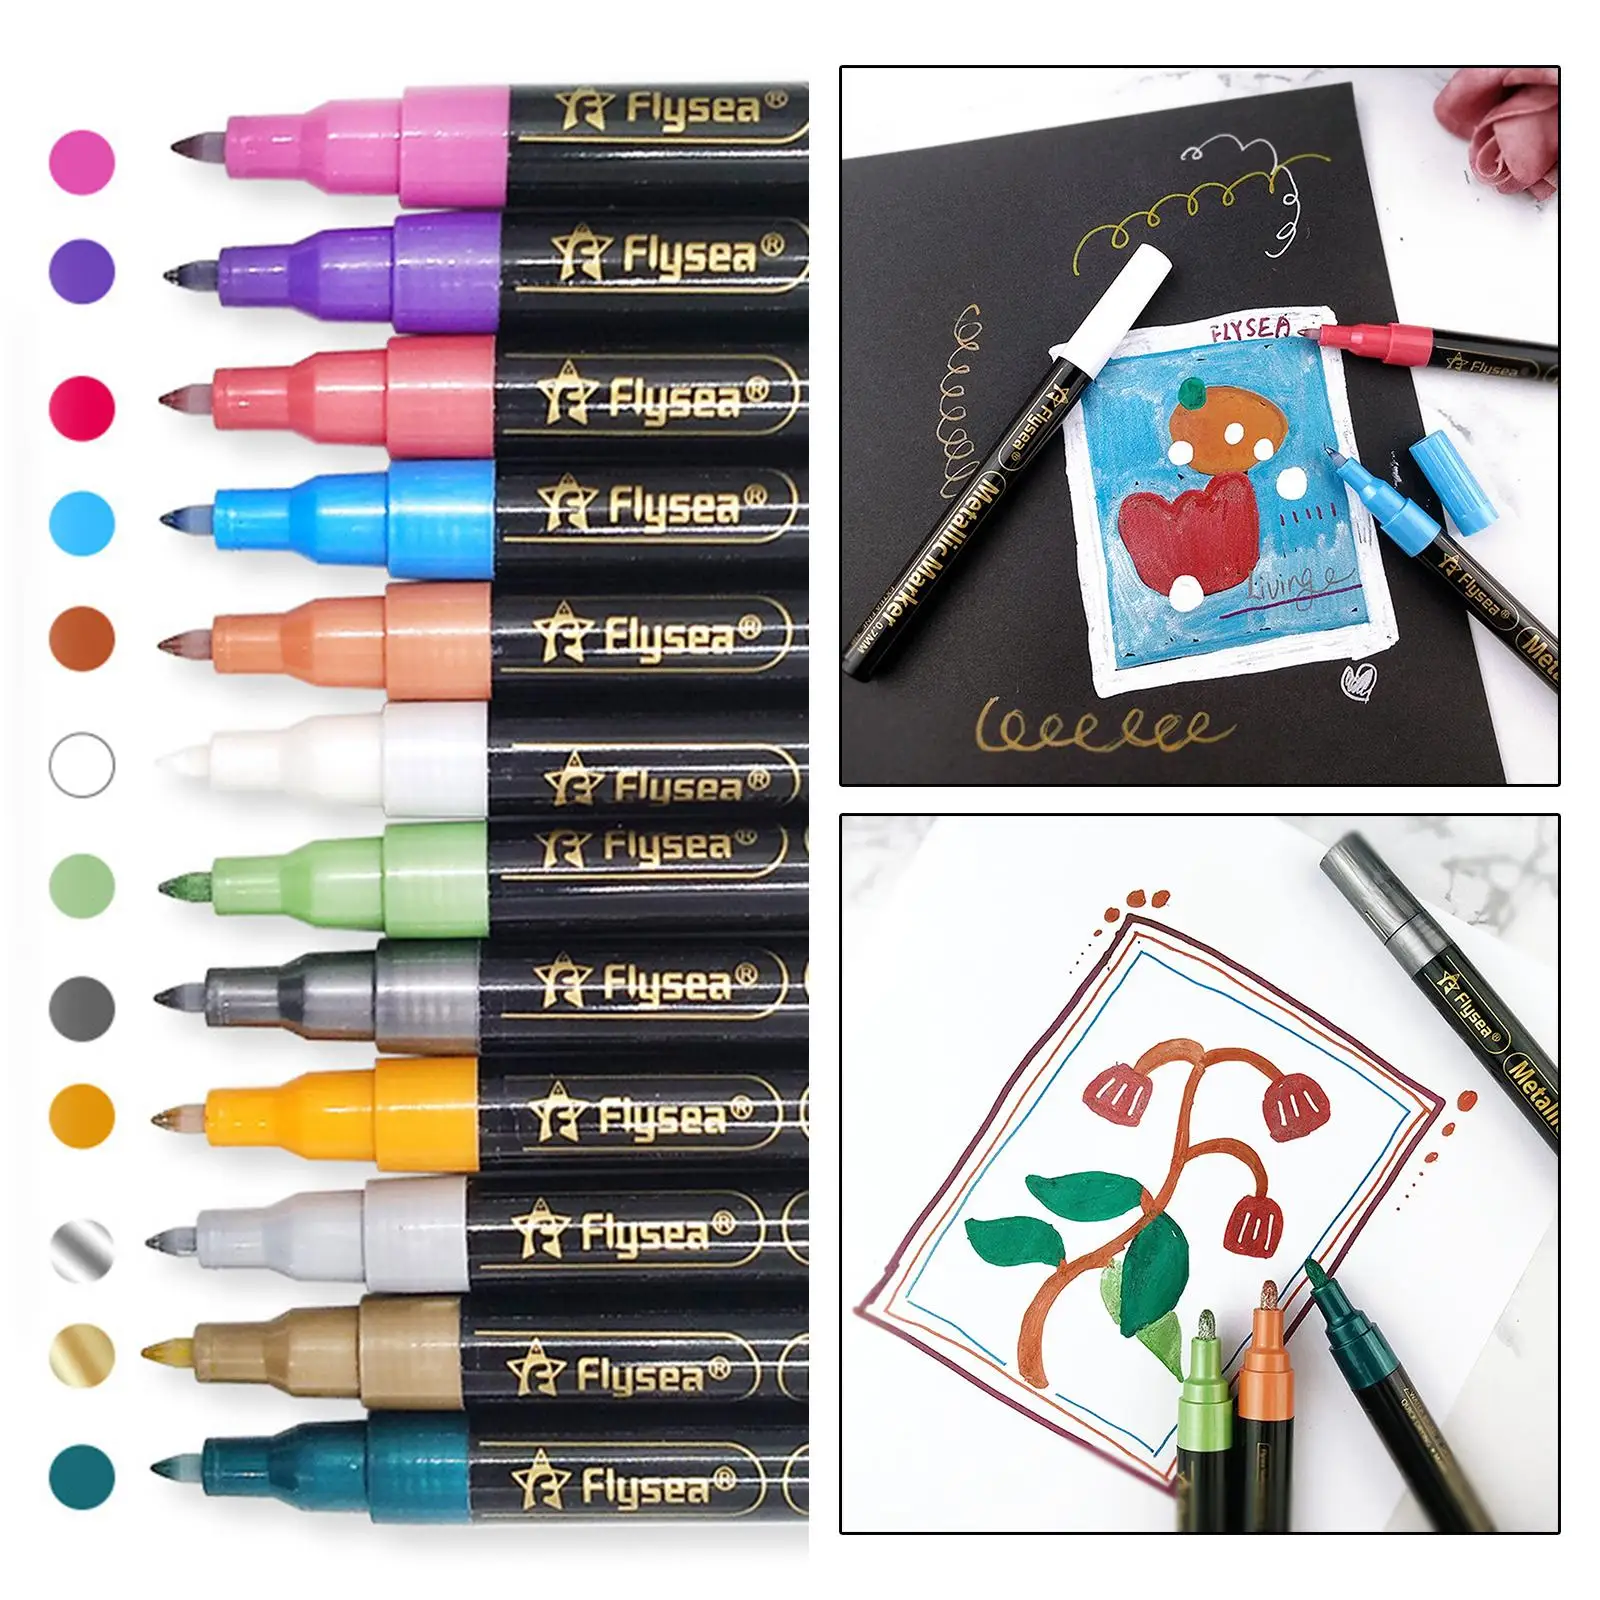 12 Colors Marker Pens Water Based Marker Pens Crafts Quick Drying  Painting Wood Photo Album Card Making Ceramic